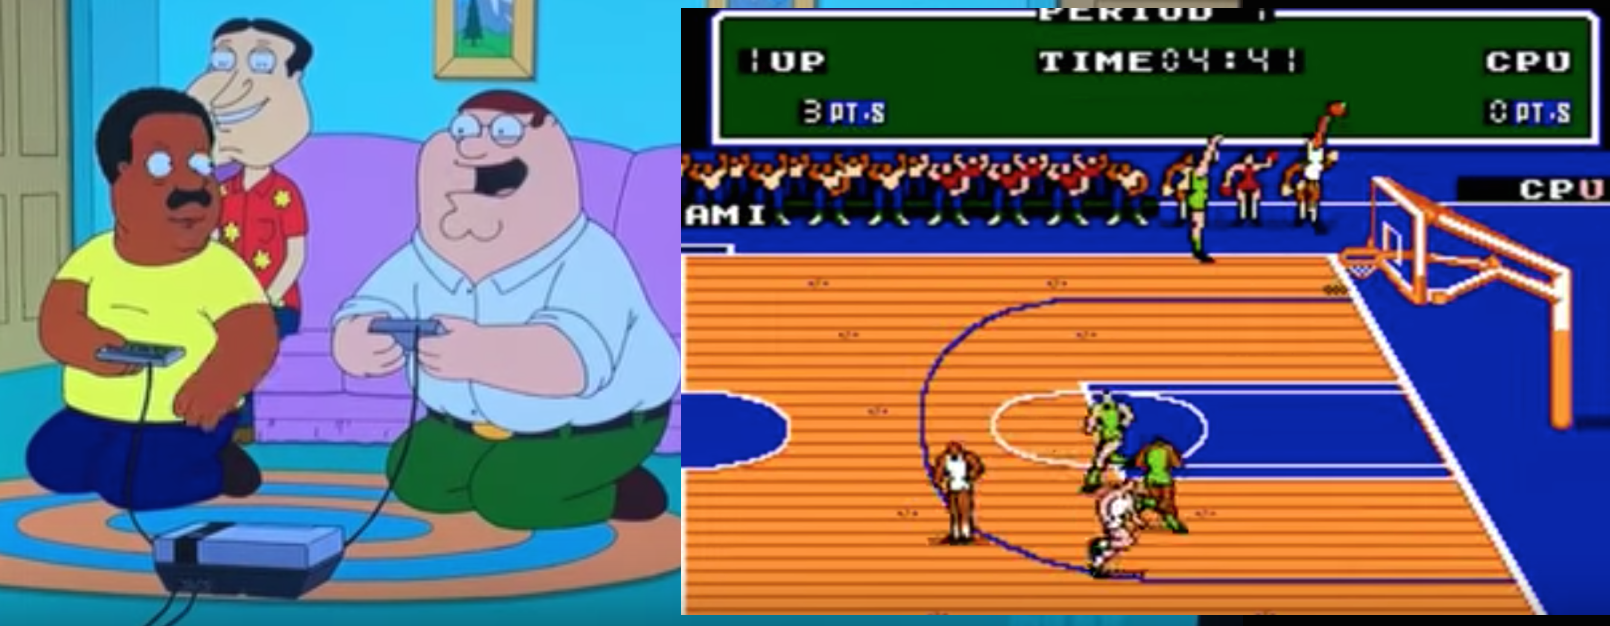 Fox Swipes YouTube Clip Of Video Game For “Family Guy” Then Demands Copyright Takedown Of Original